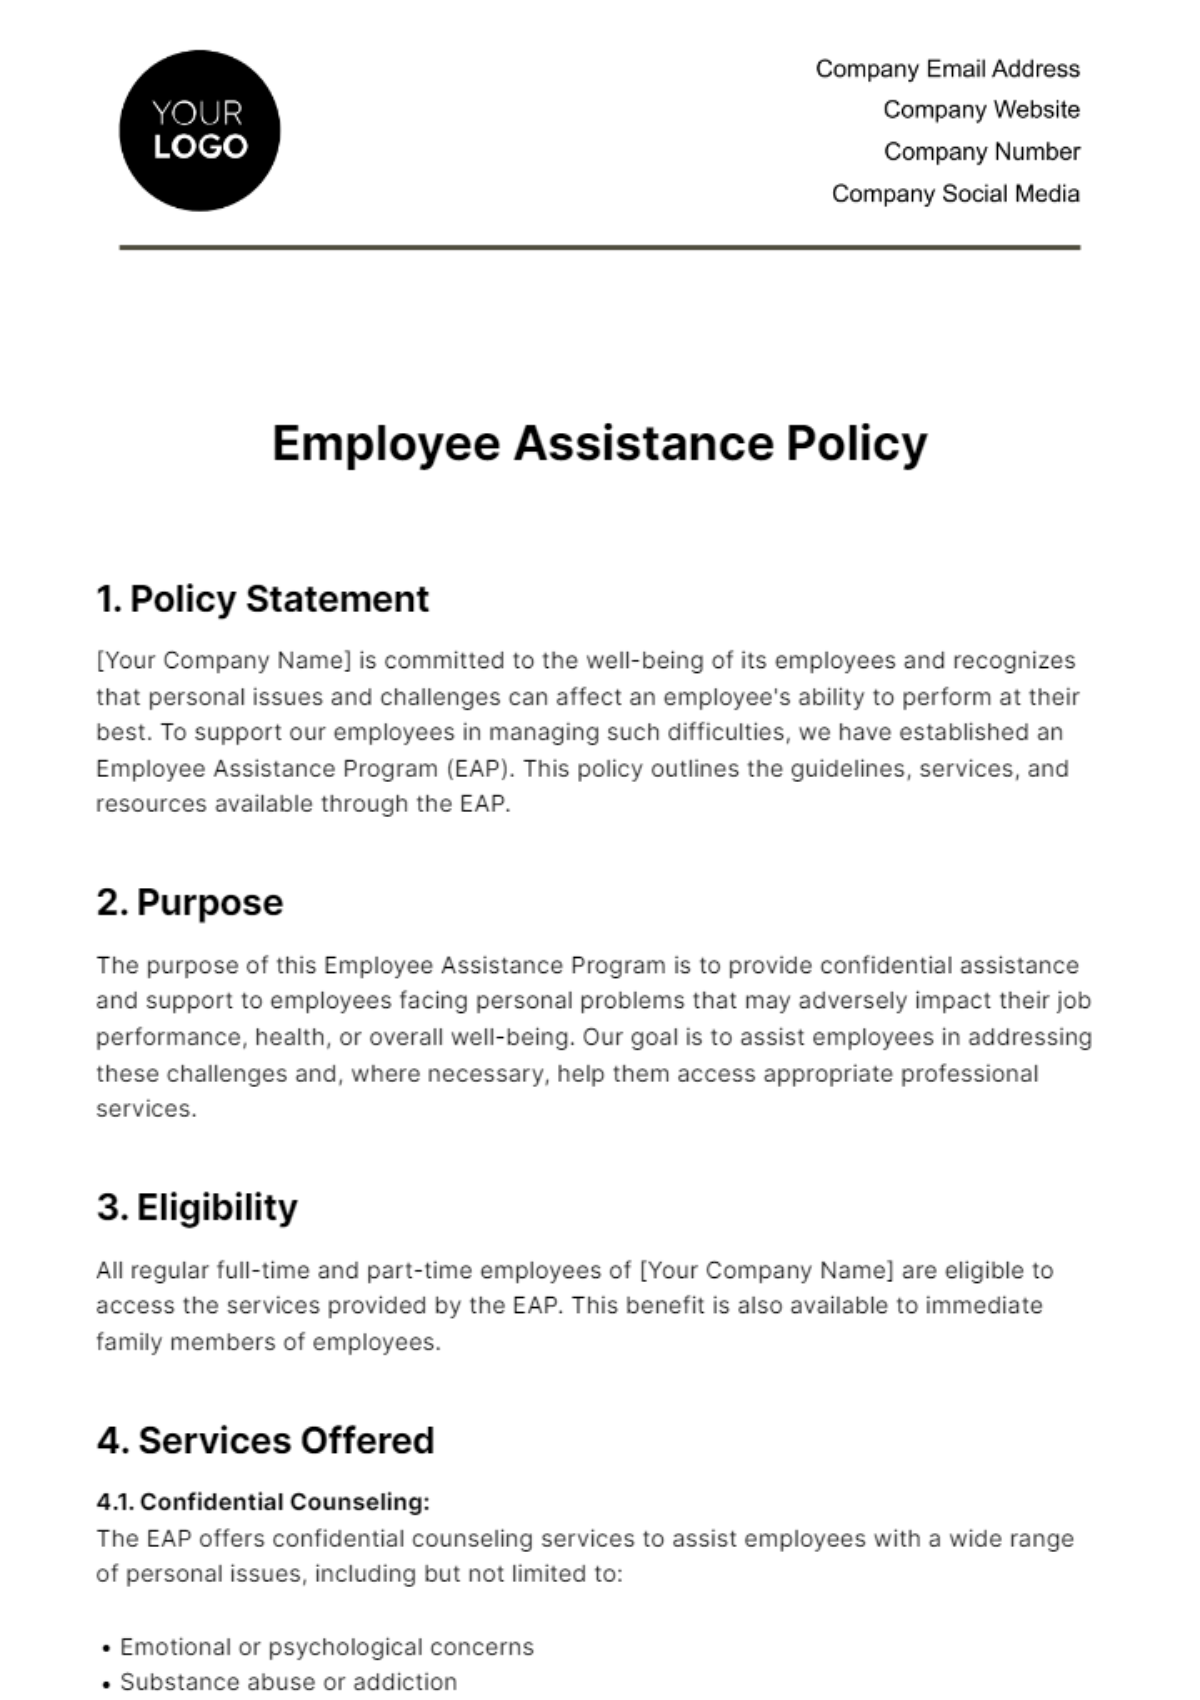 Employee Assistance Policy HR Template